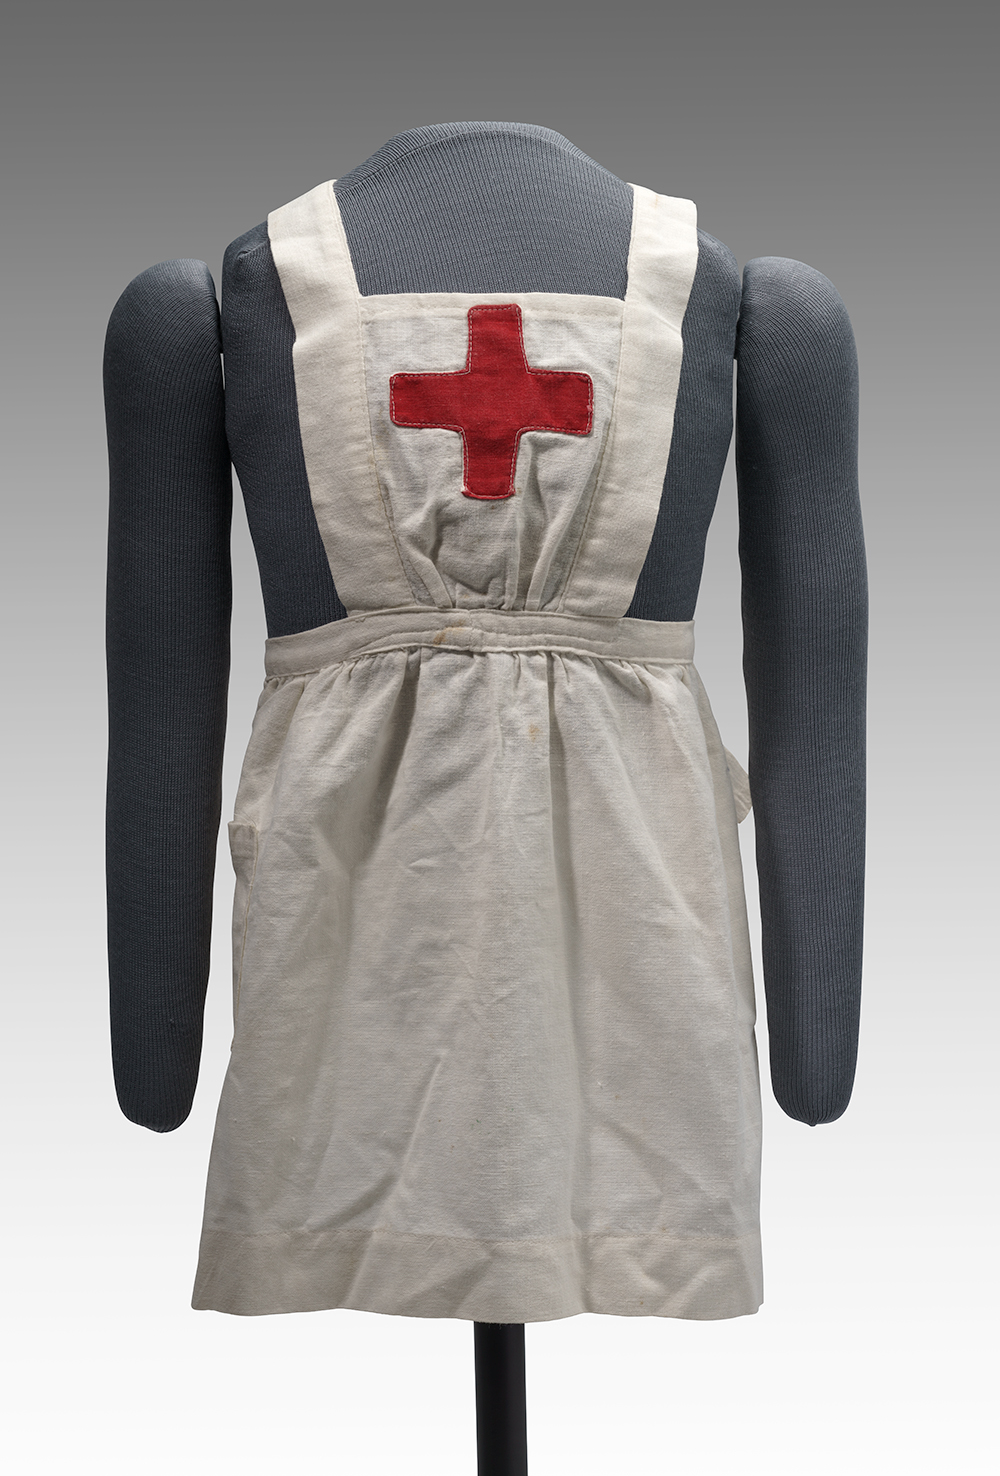 Modern photograph of a small white smock apron with a red cross on the front